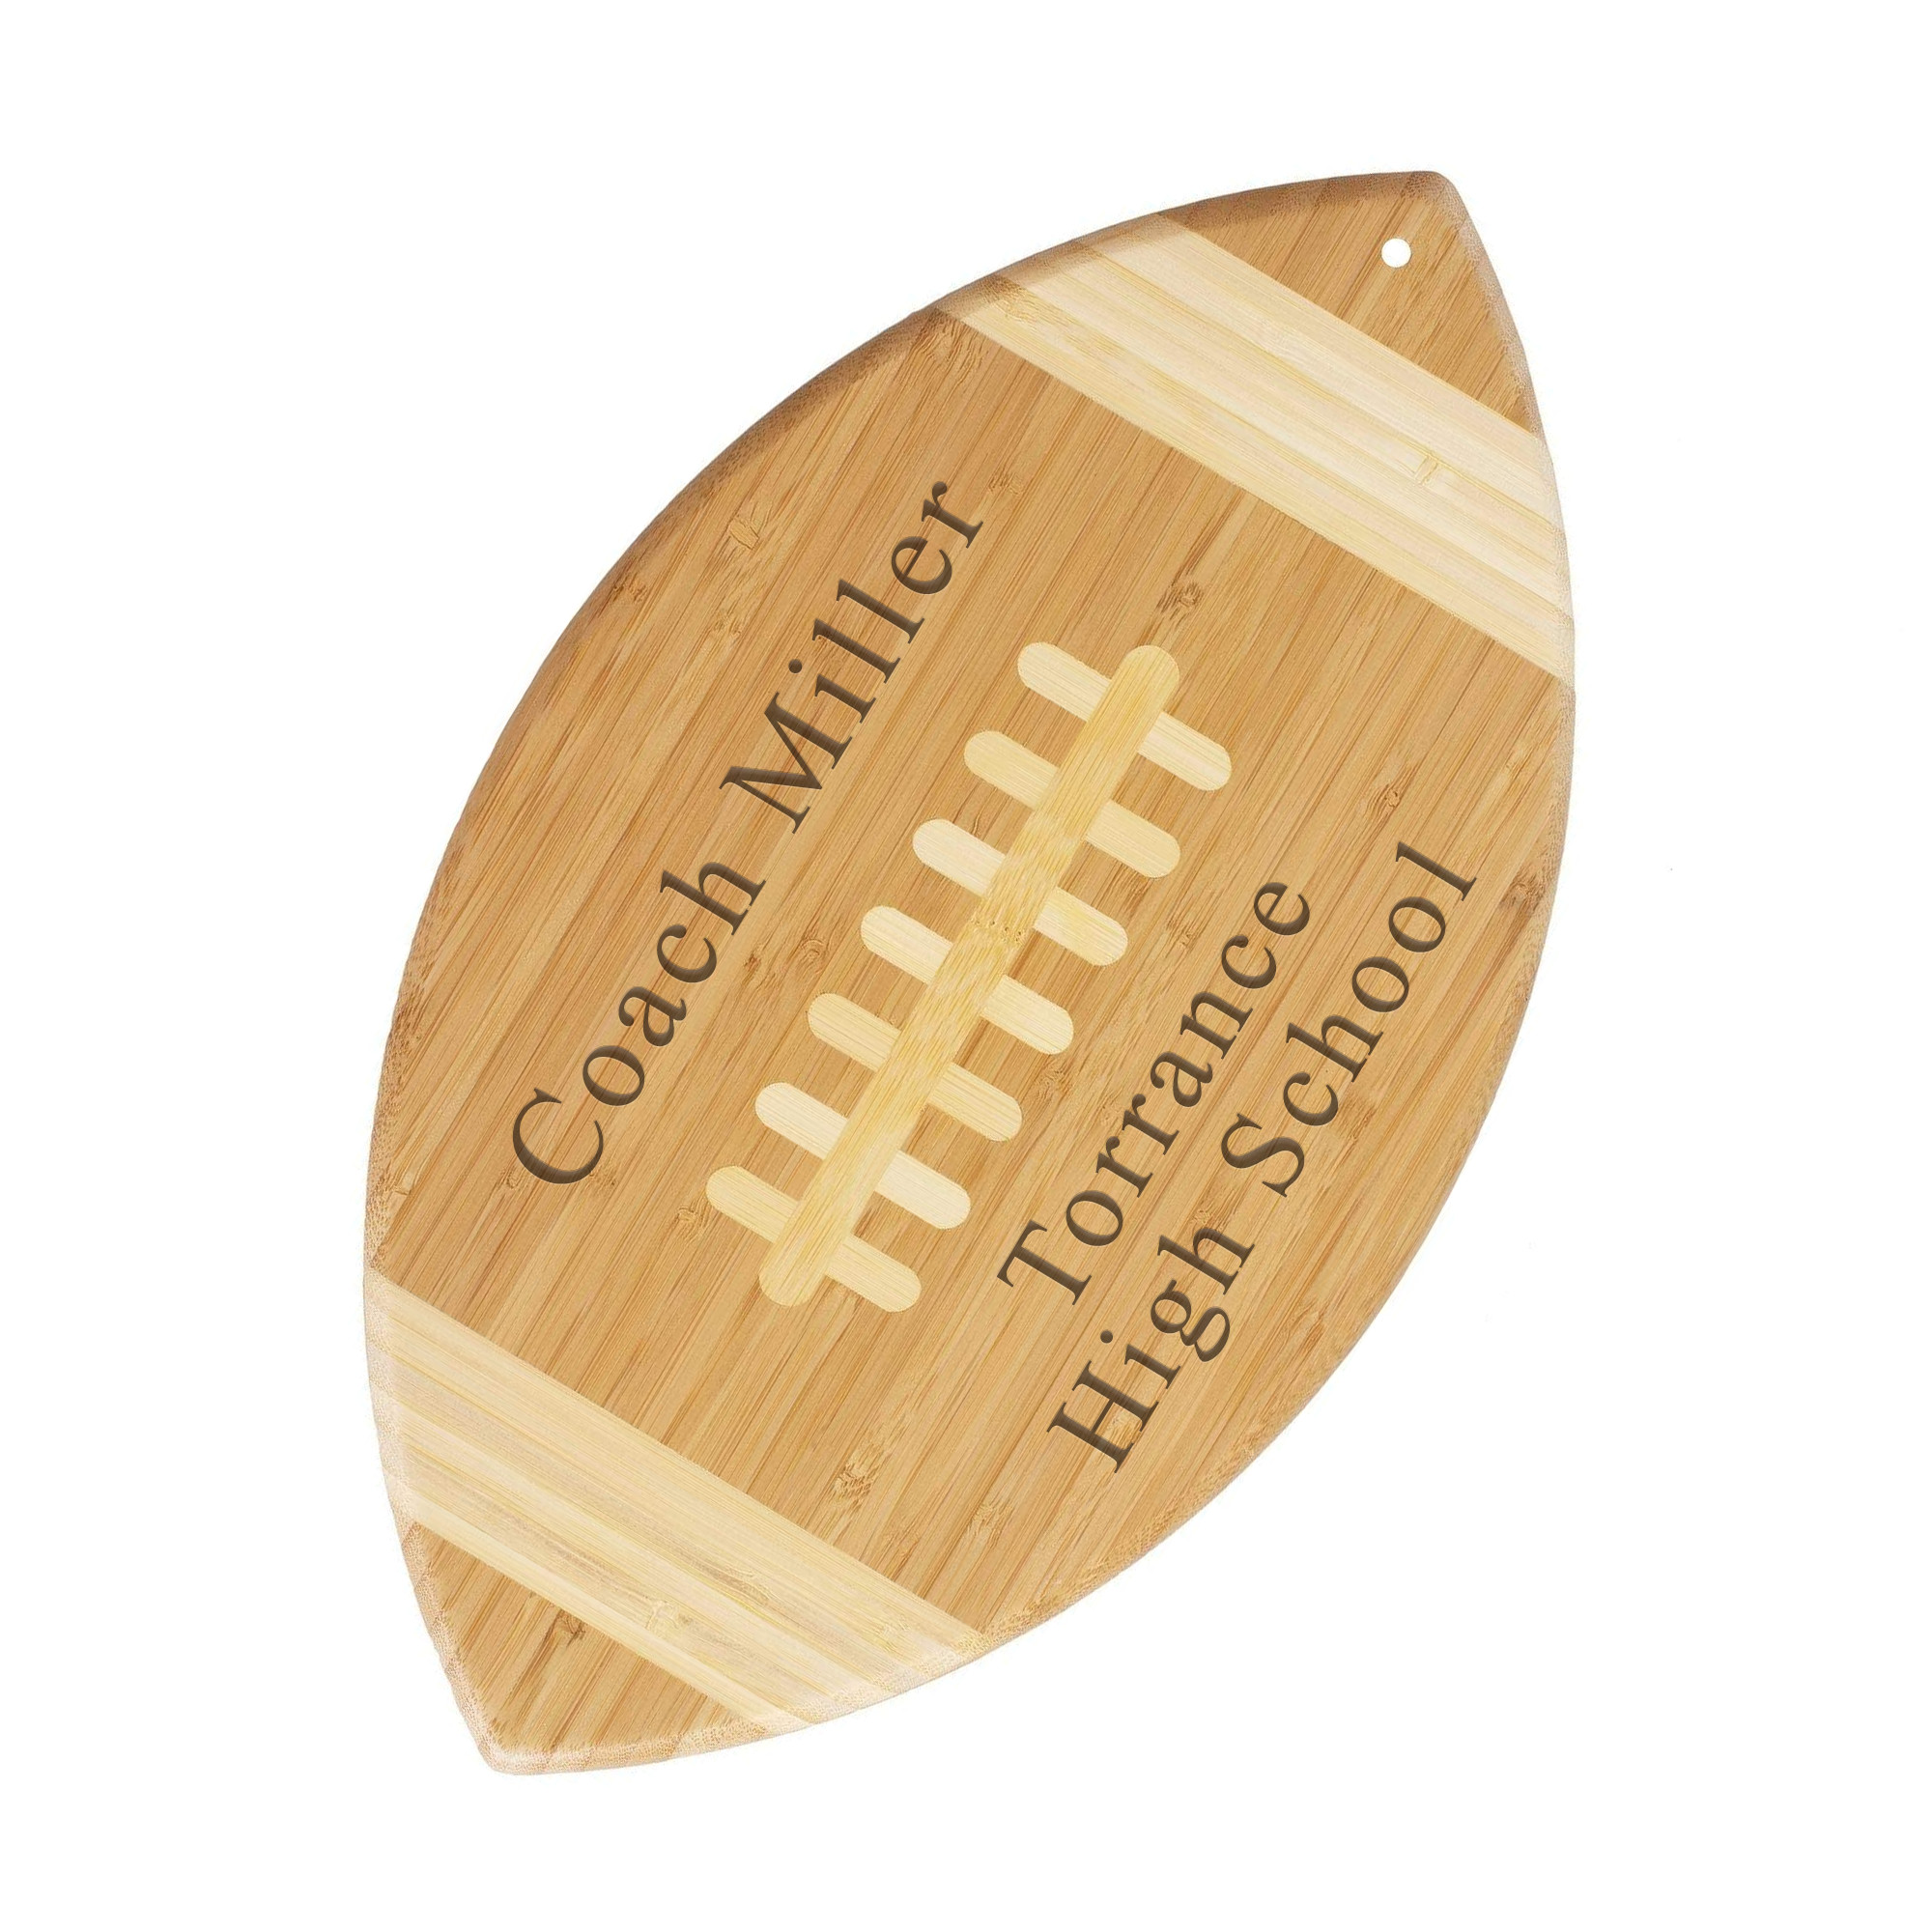 https://www.hansonellis.com/mm5/graphics/00000001/3/bamboo-football-cutting-boards-kitchen-personalized-award-plaque-trophy.jpg